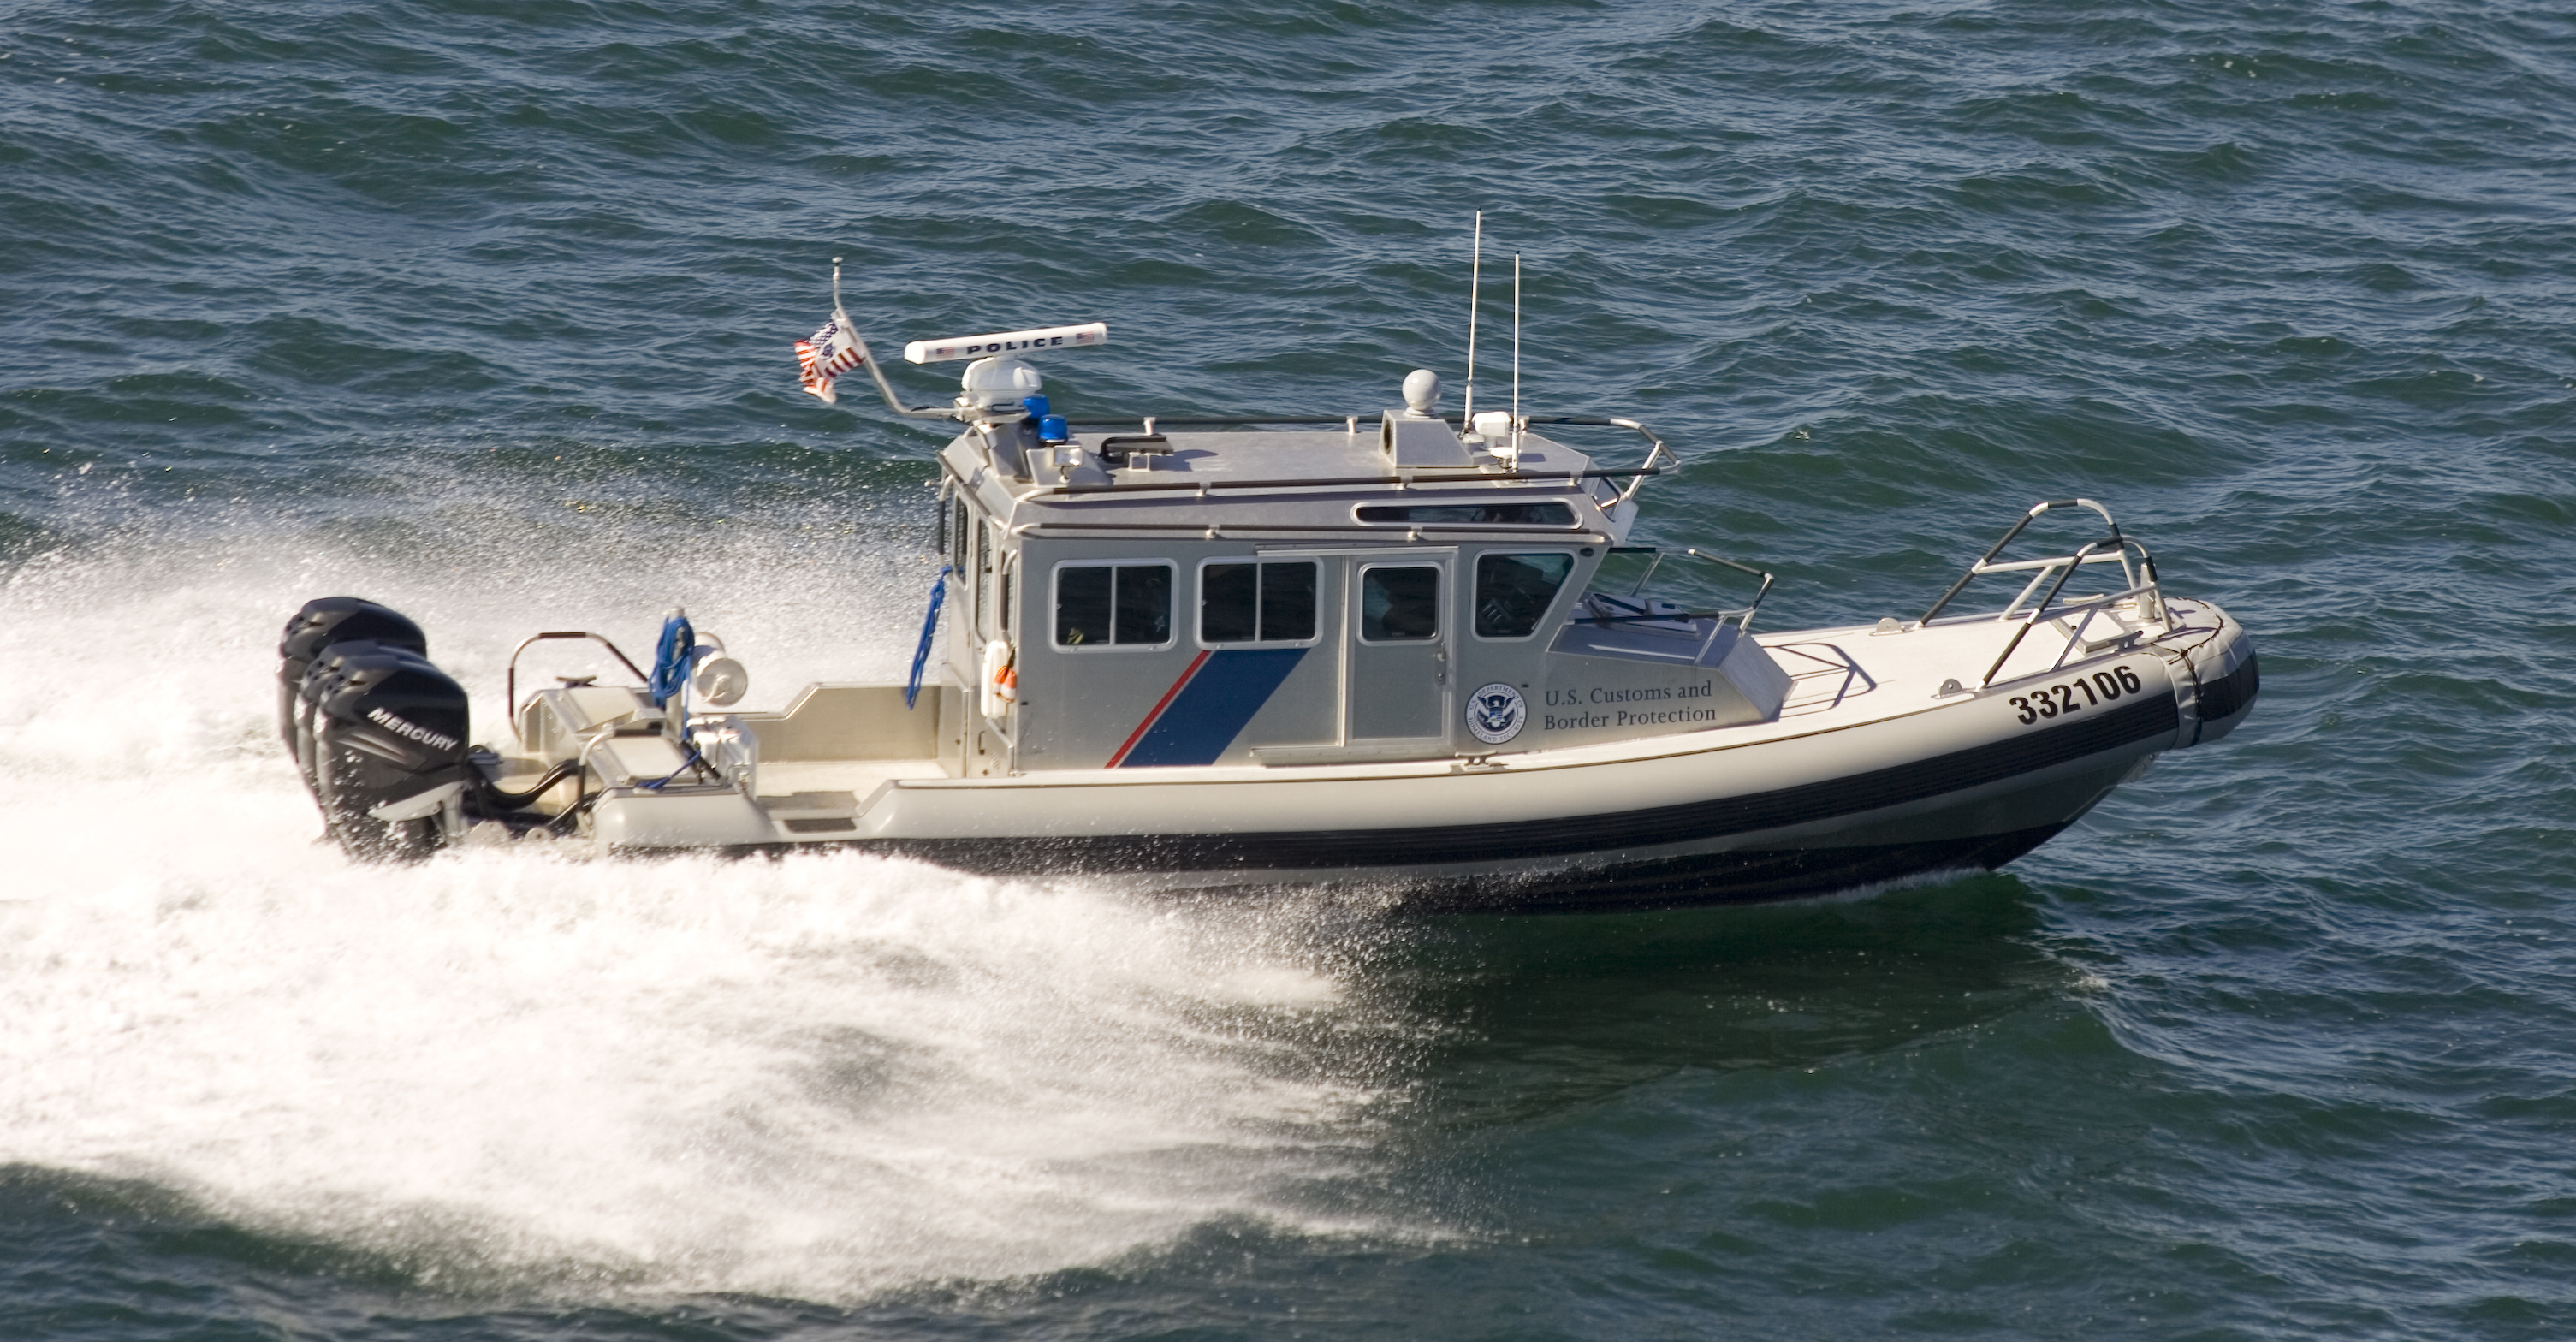 A Customs and Border Protection Safe Boat Marine Unit patrol the waters near Bellingham, Washington.